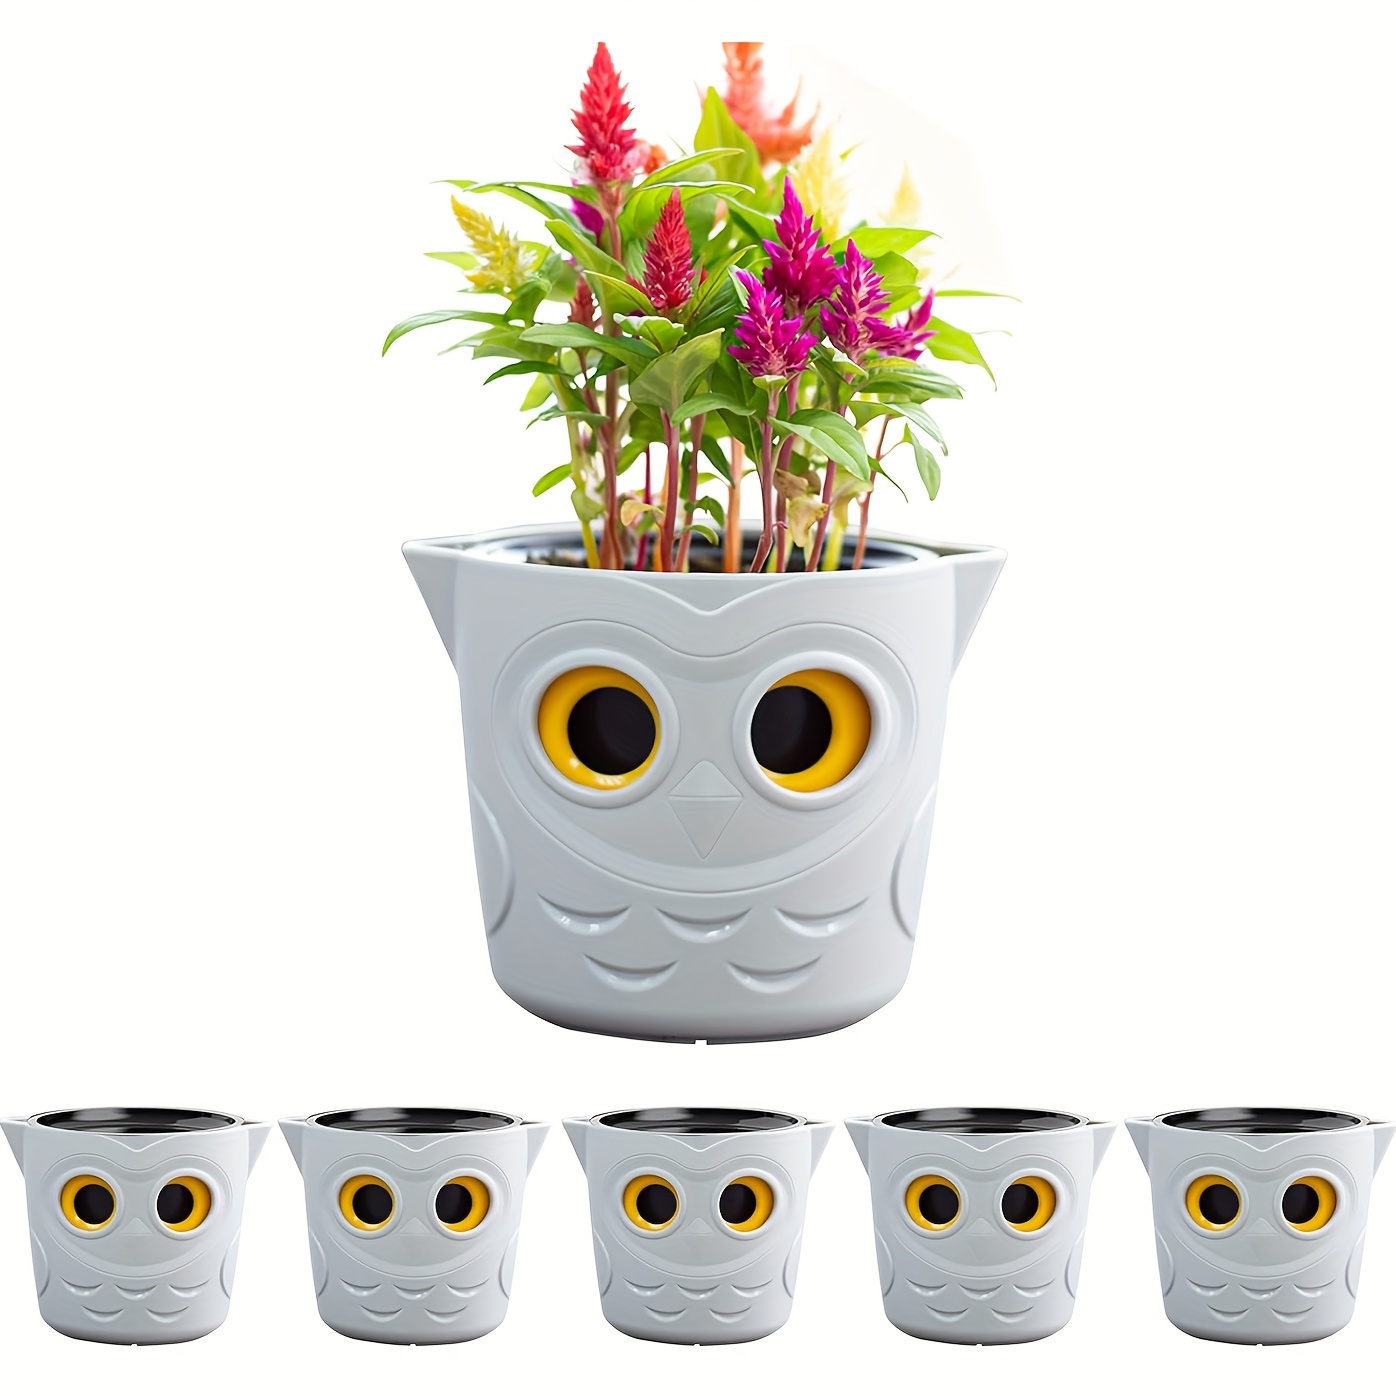 

6/12pack Plant Pots, 4" Self Watering Planters For Indoor Plants With Owl Eye Water Level Indicator, Cute Flower Pots For Succulents, African Violet, Holiday Decor Gift